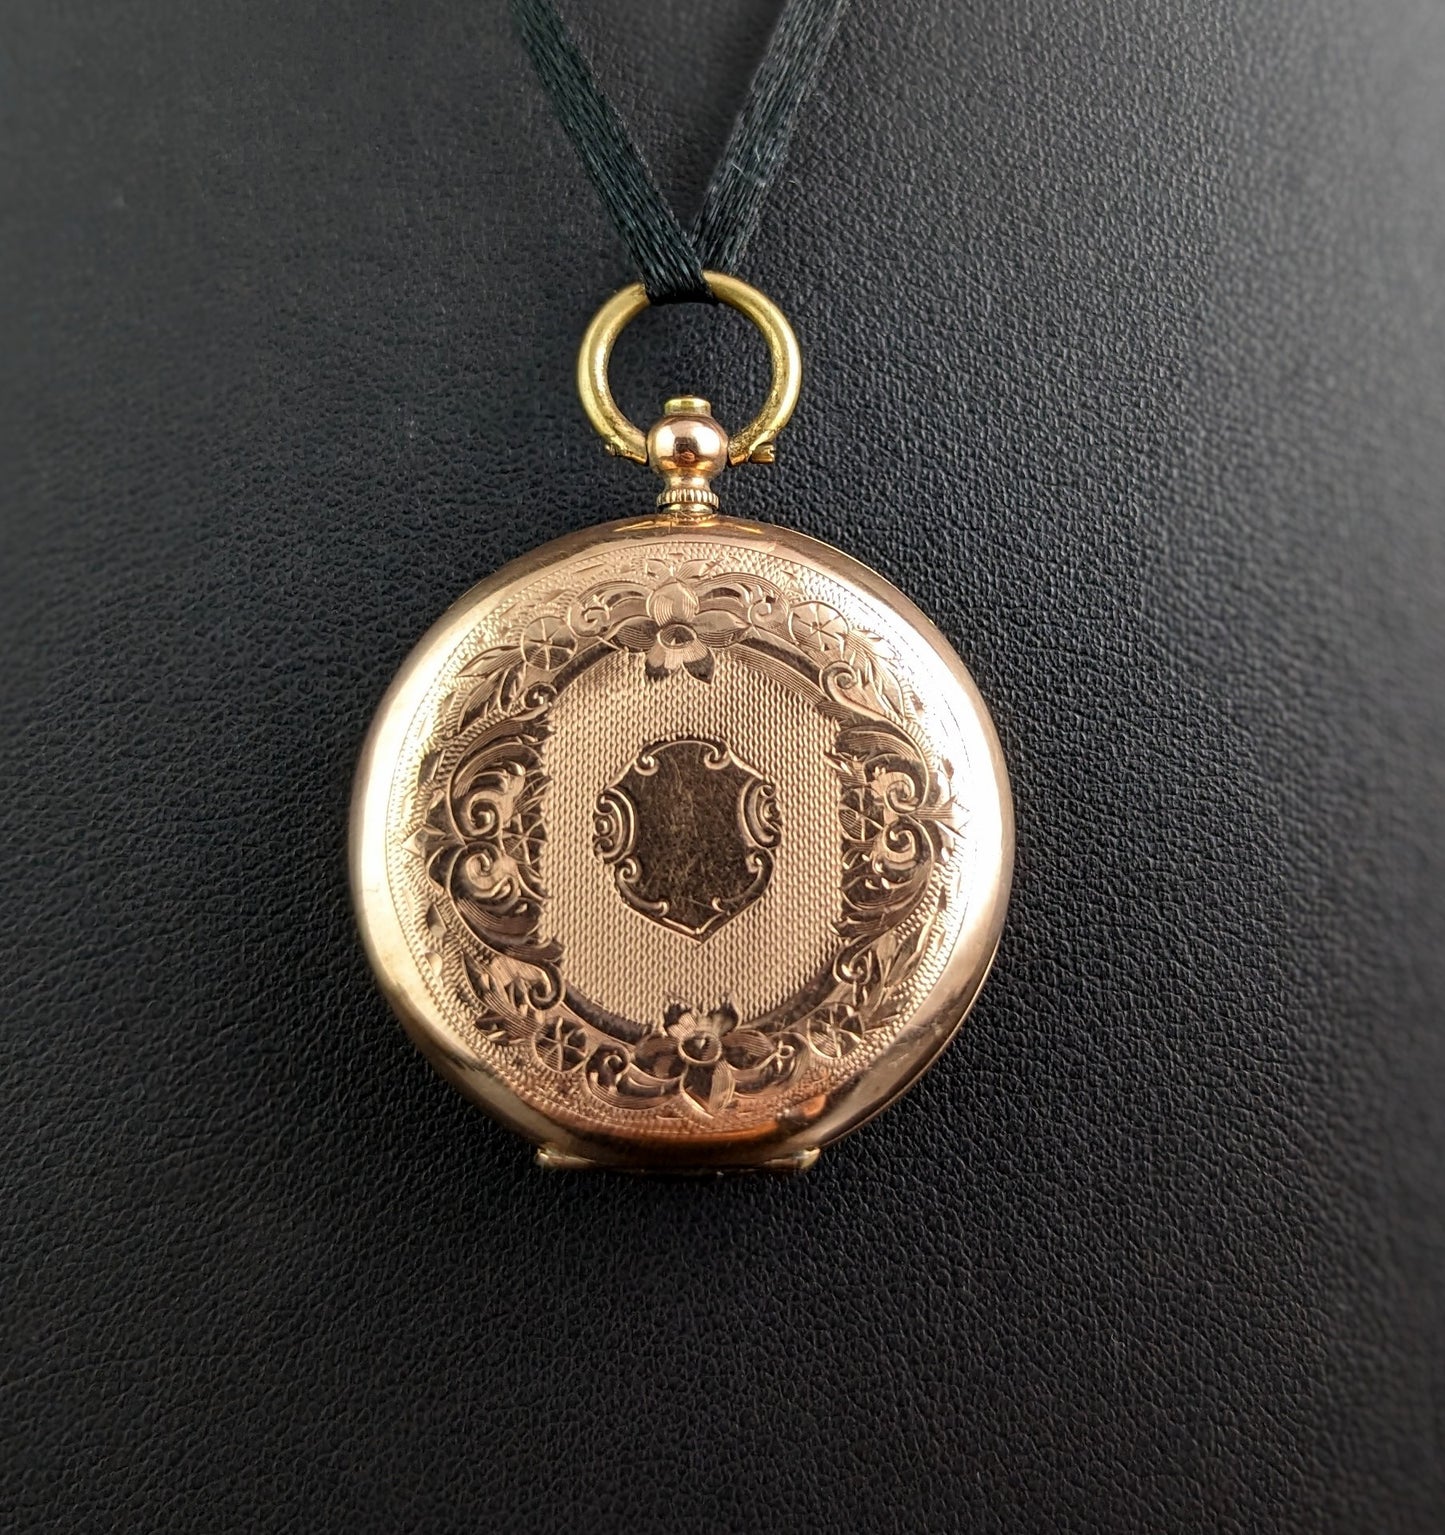 Antique 9ct gold ladies pocket watch, floral, fob watch